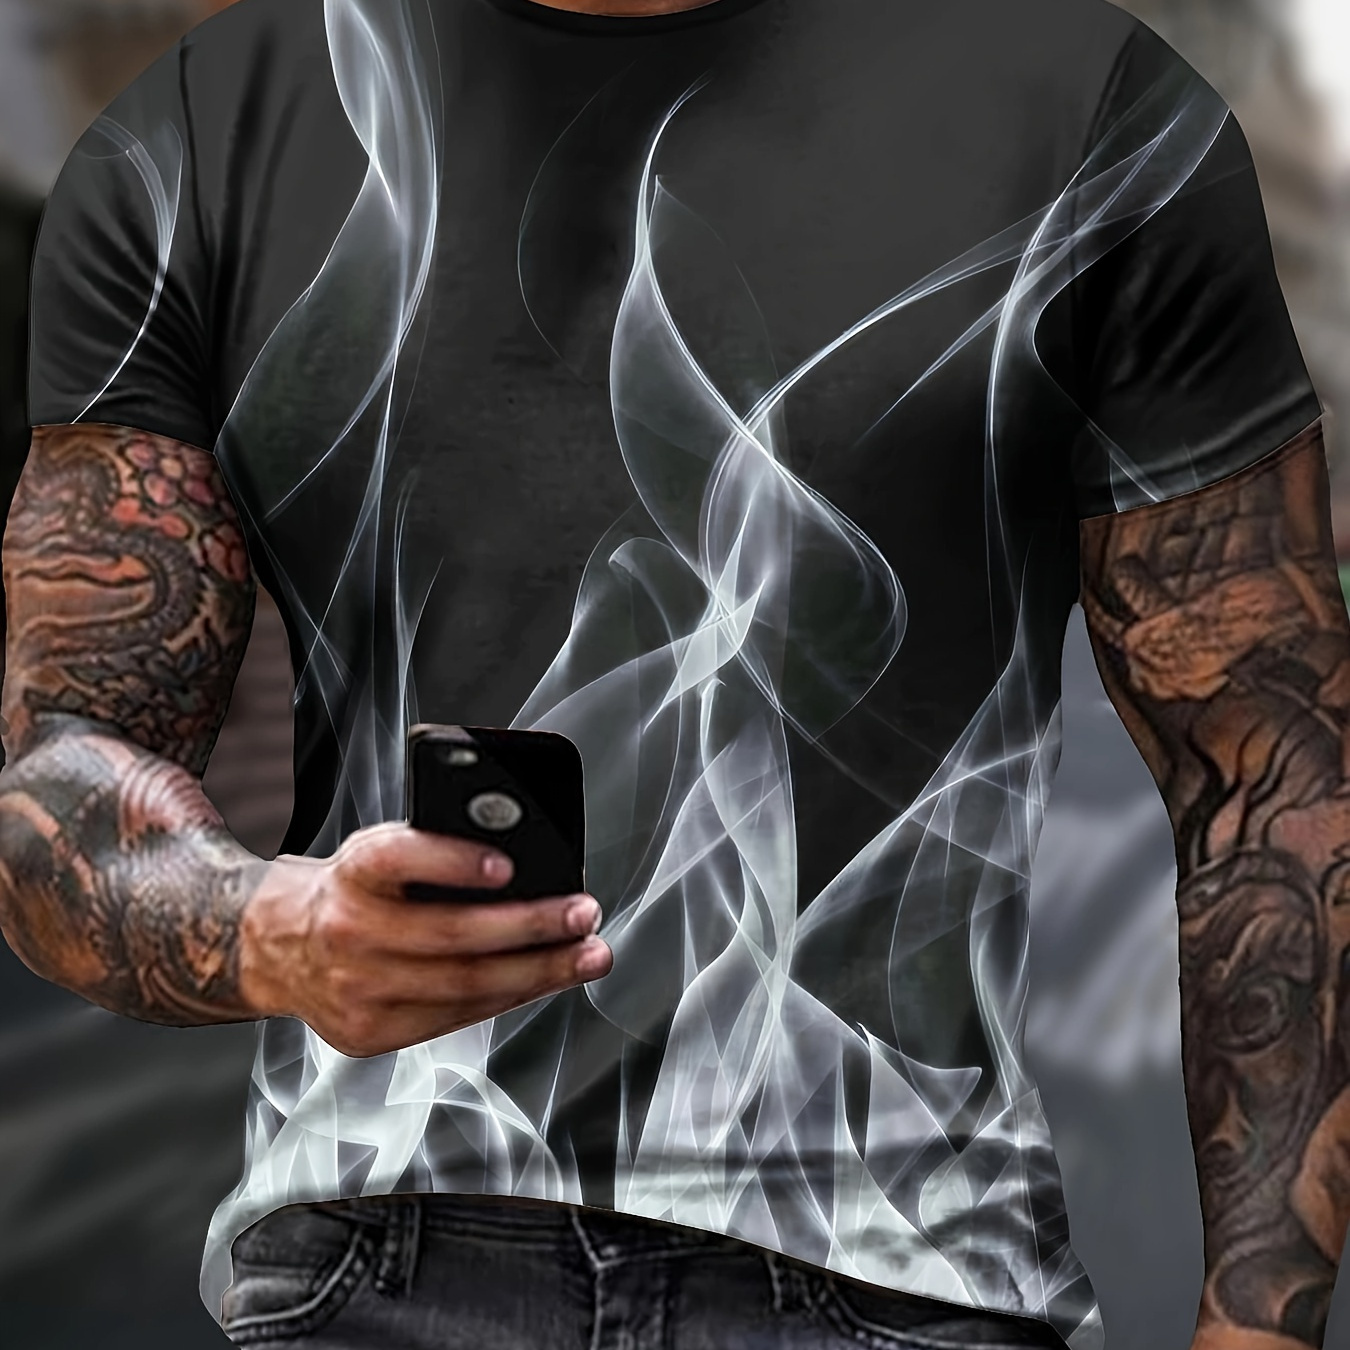 

Men's White Fire Graphic Like Pattern Print T-shirt With Crew Neck And Short Sleeve, Novel And Stylish Tops Suitable For Summer Leisurewear And Outdoors Activities